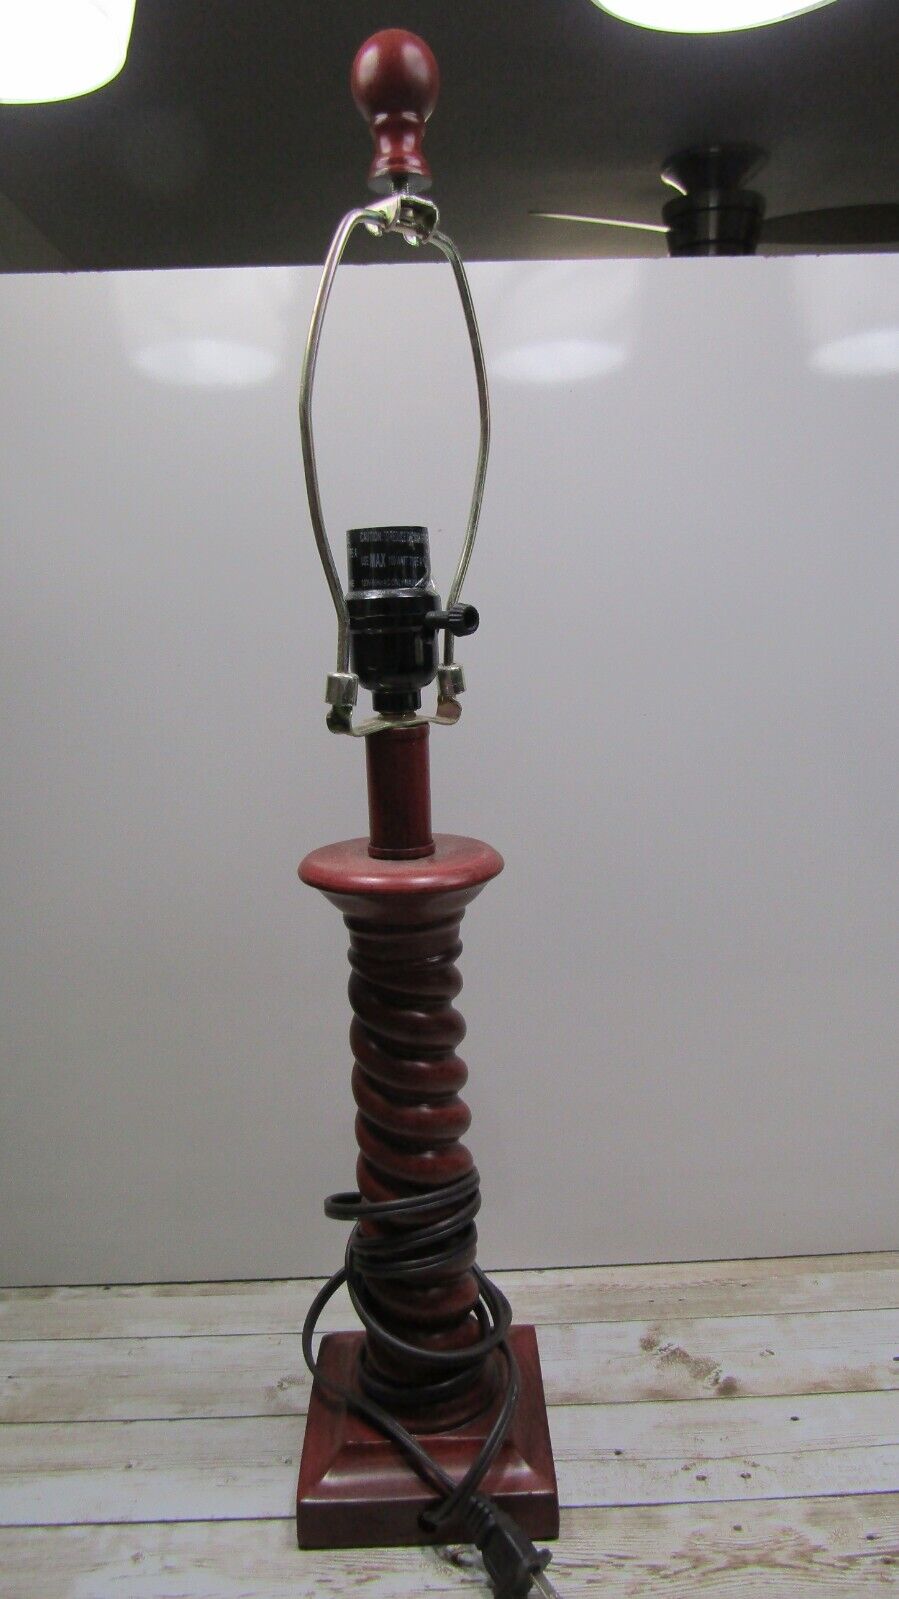 Vintage Wood Rustic Lamp without shade in dark Red color tall